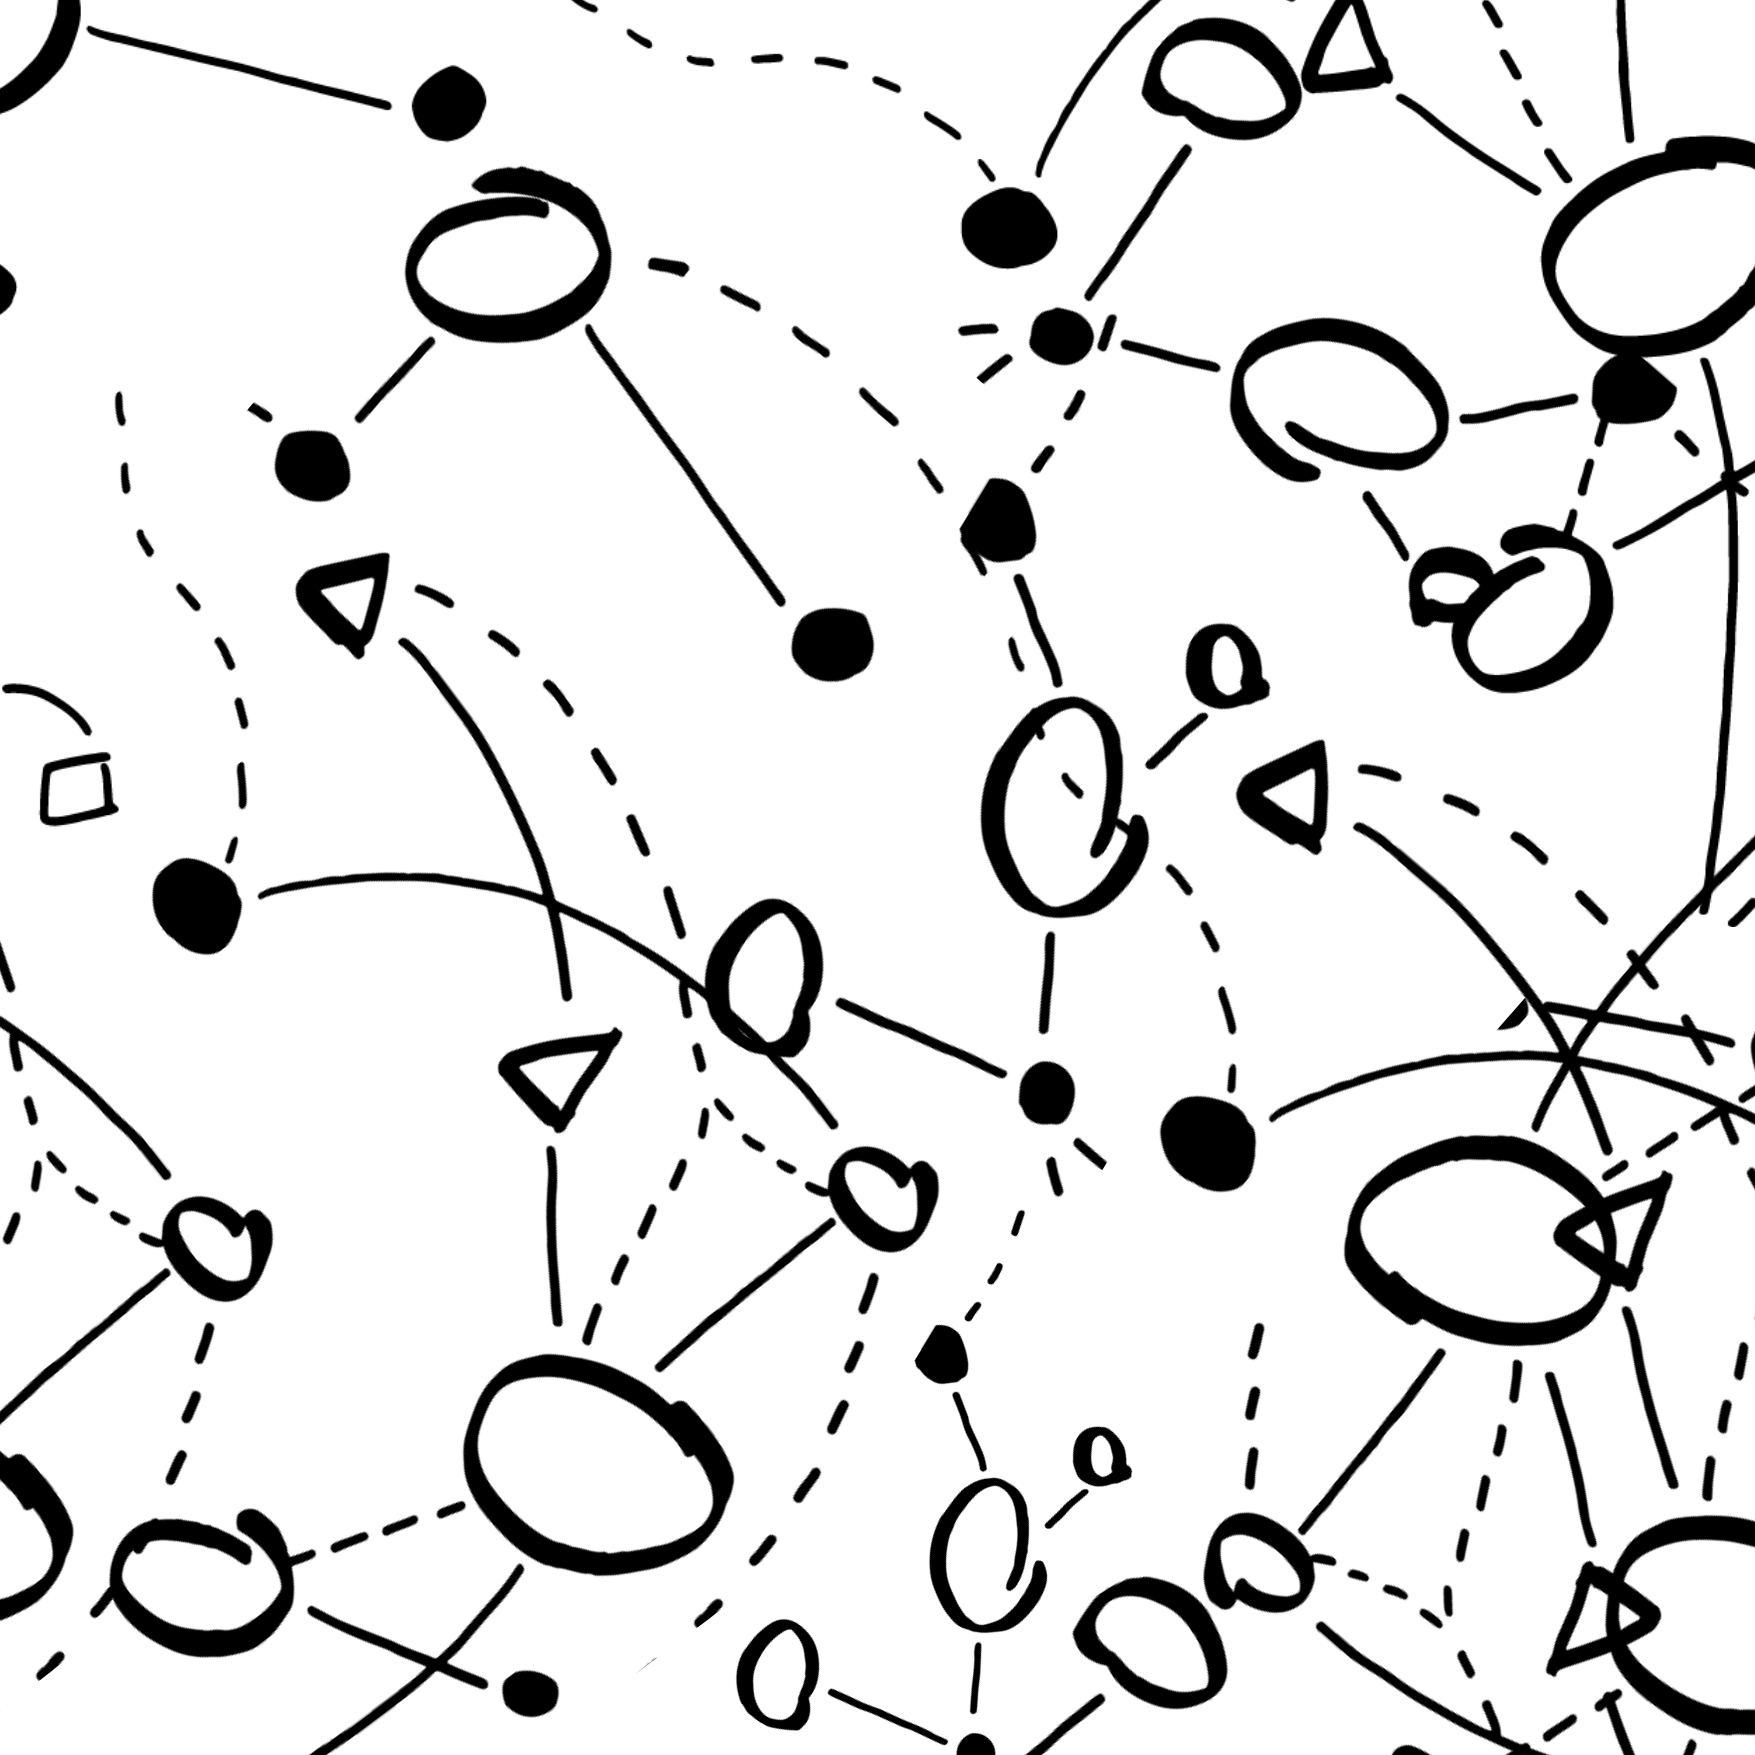 A graphic with a white background and hand drawn black circles and lines